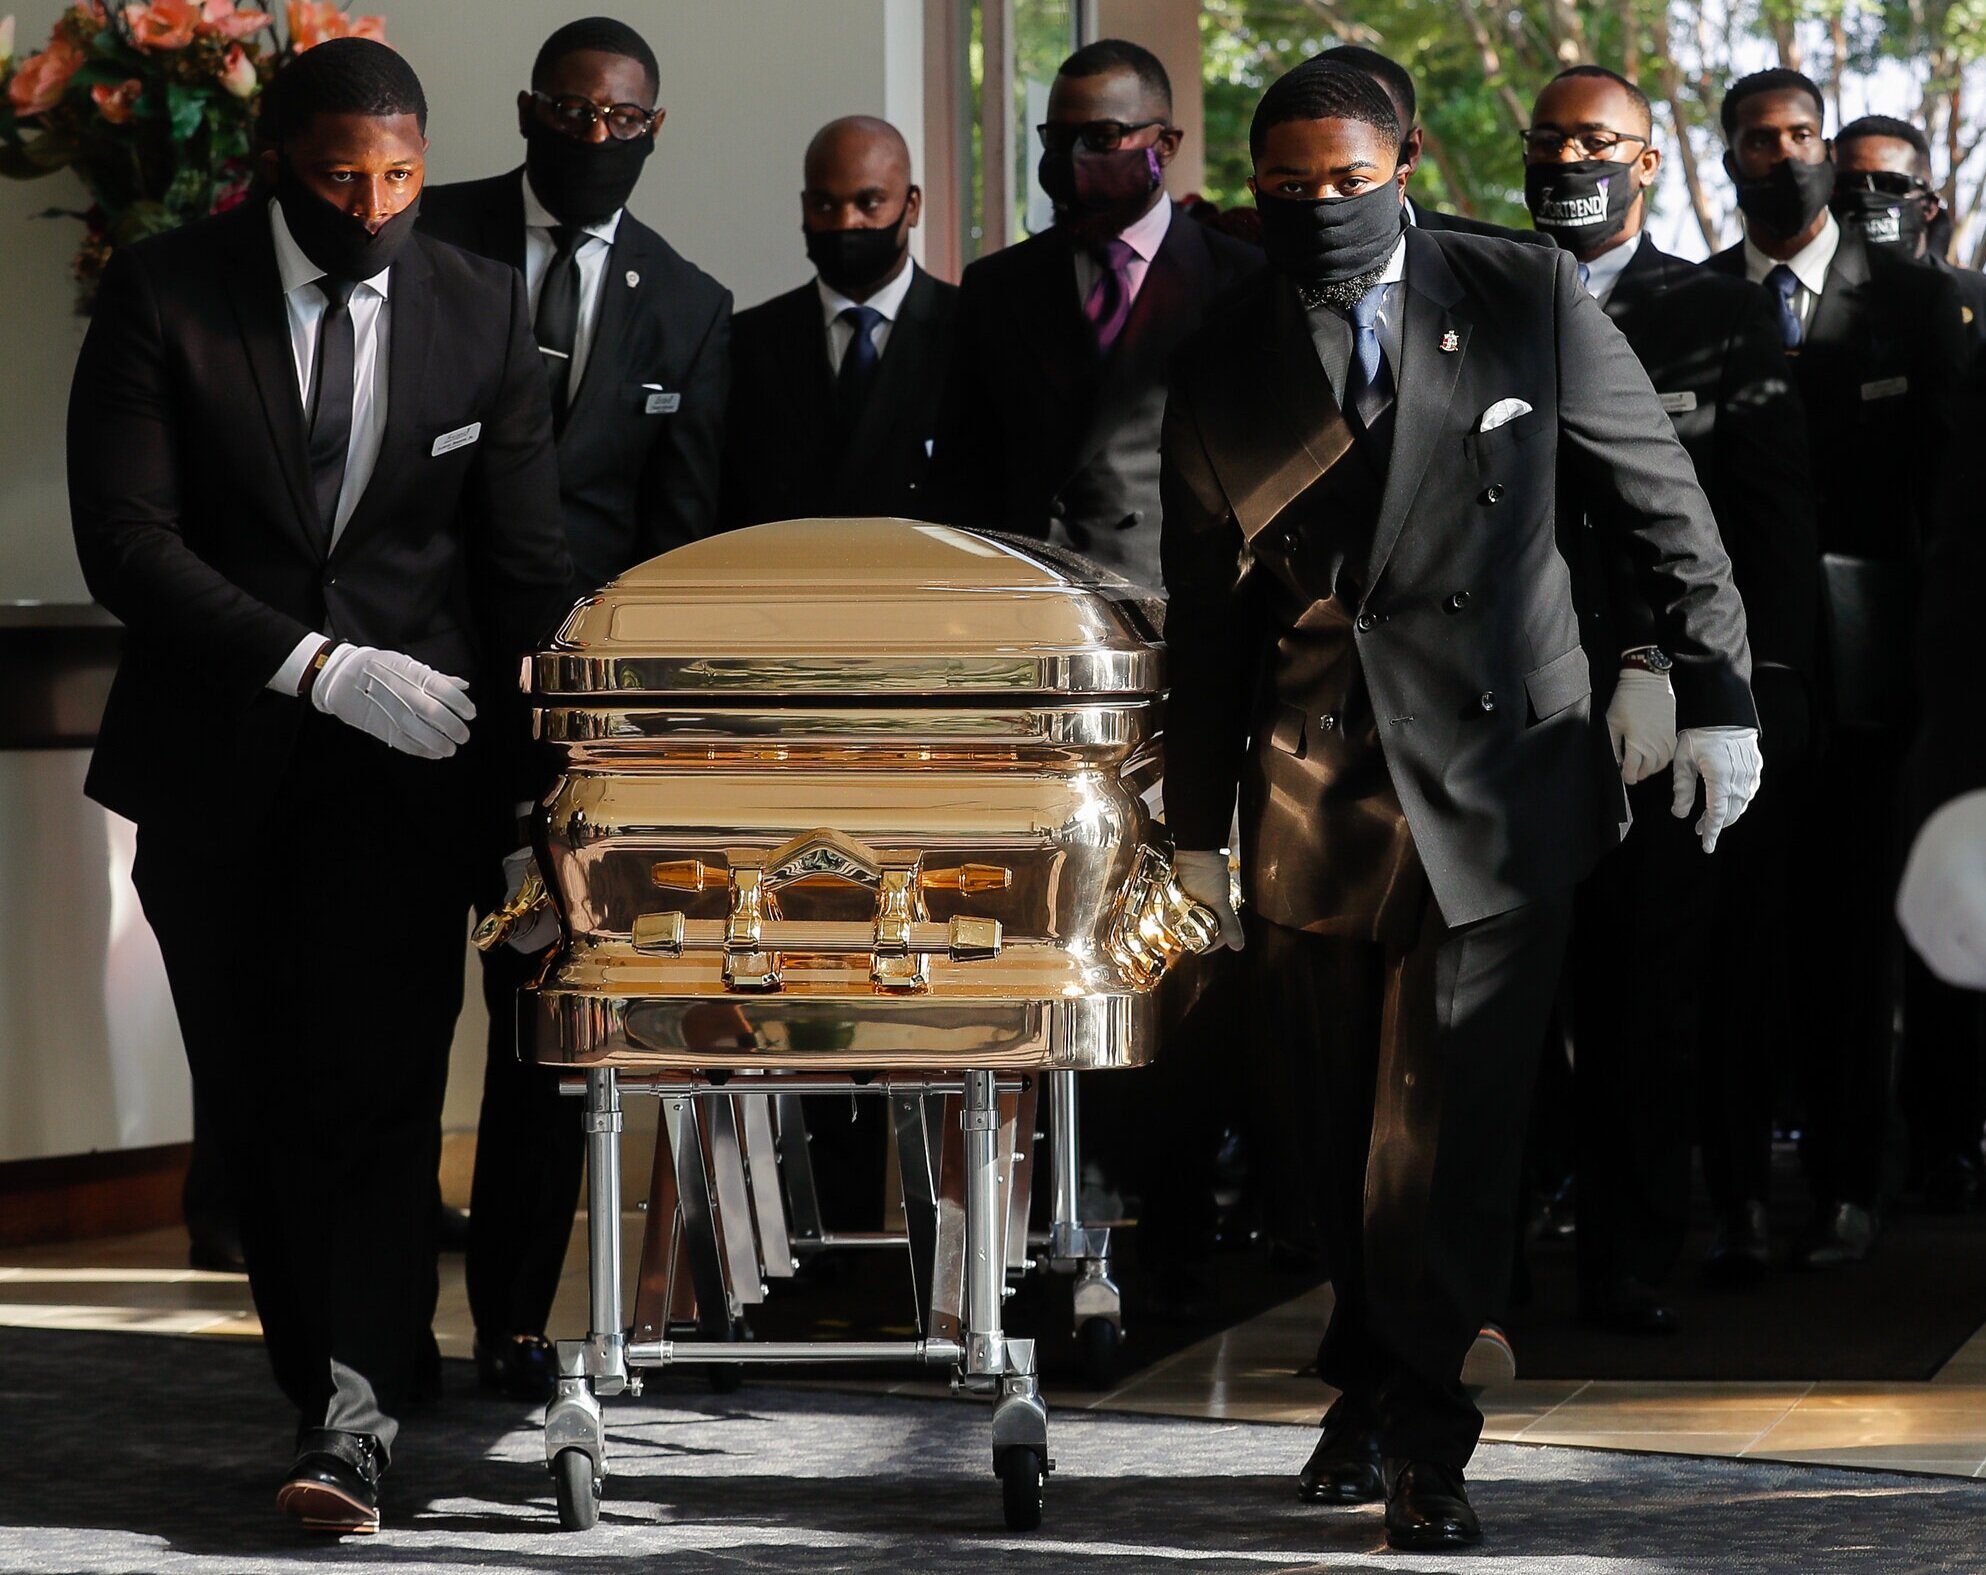  Pallbearers bring the casket carrying the body of former Houston resident George Floyd into The Fountain of Praise church for the funeral service Tuesday, June 9, 2020, in Houston, Texas. Floyd died while in custody of the Minneapolis Police Departm